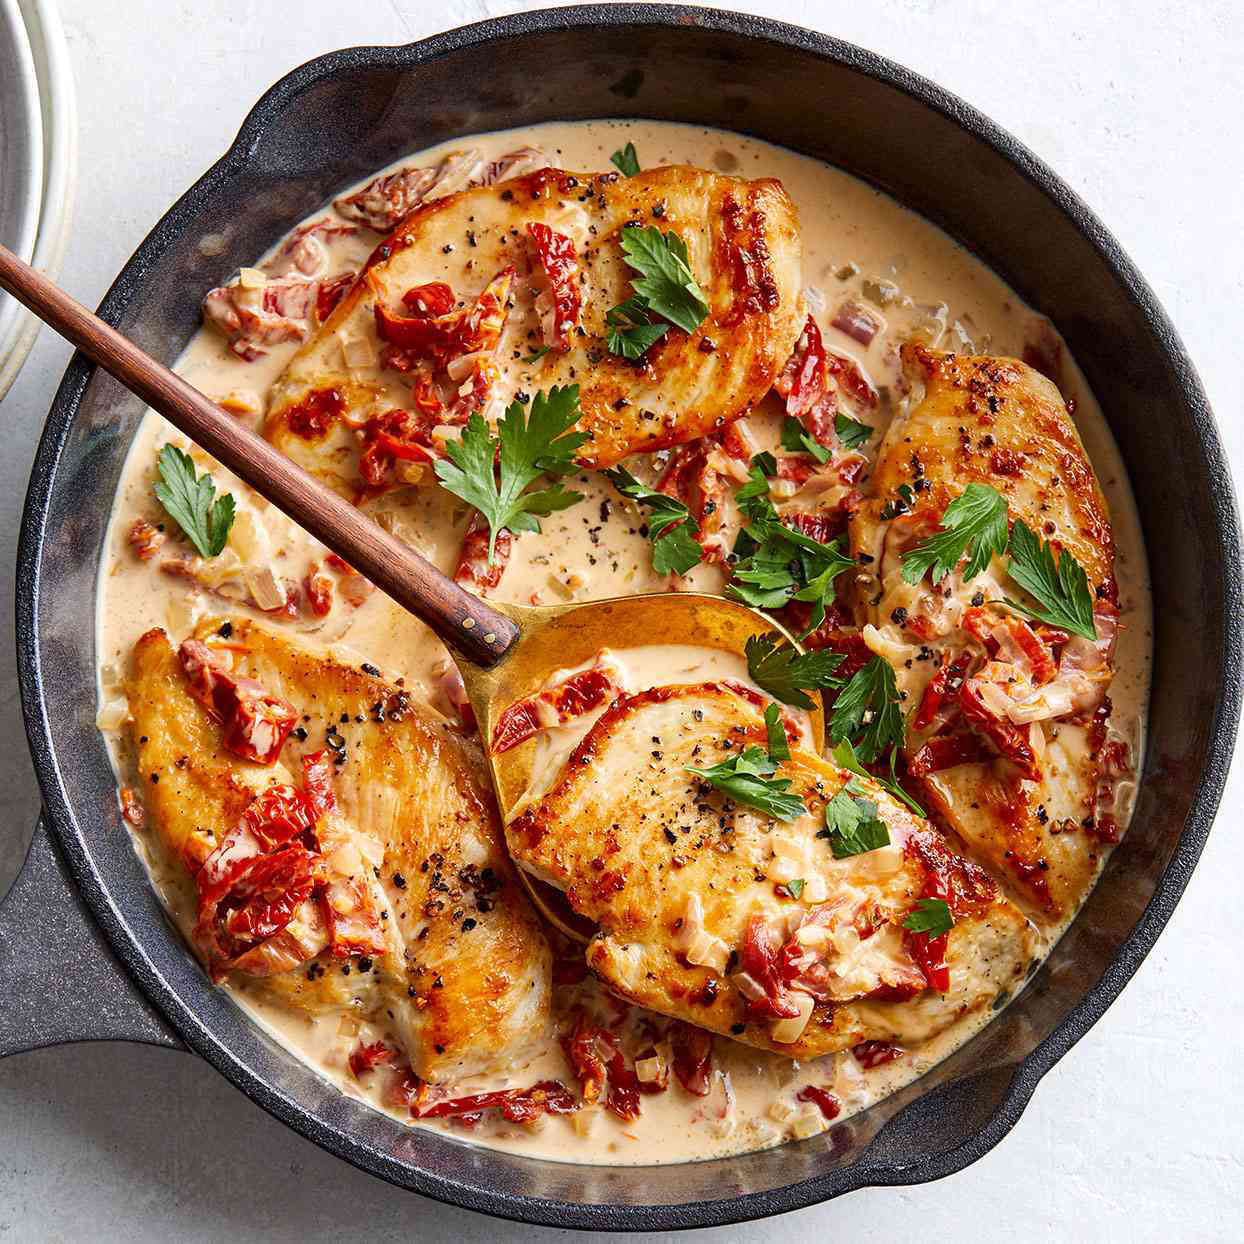 Our 20 Most Popular Dinner Recipes of All Time